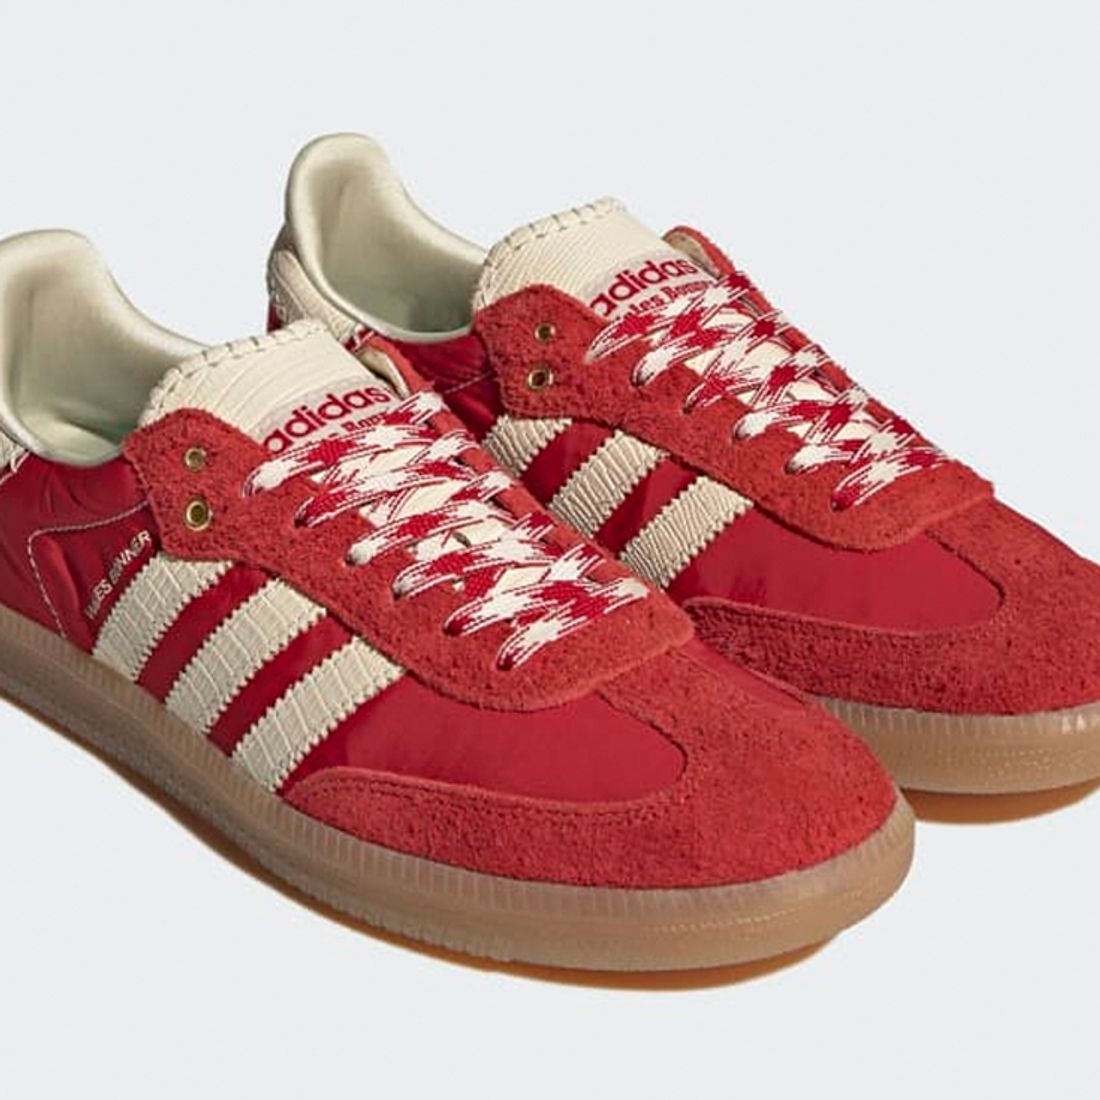 The adidas Samba is the Perfect Canvas for Wales Bonner - Freaker